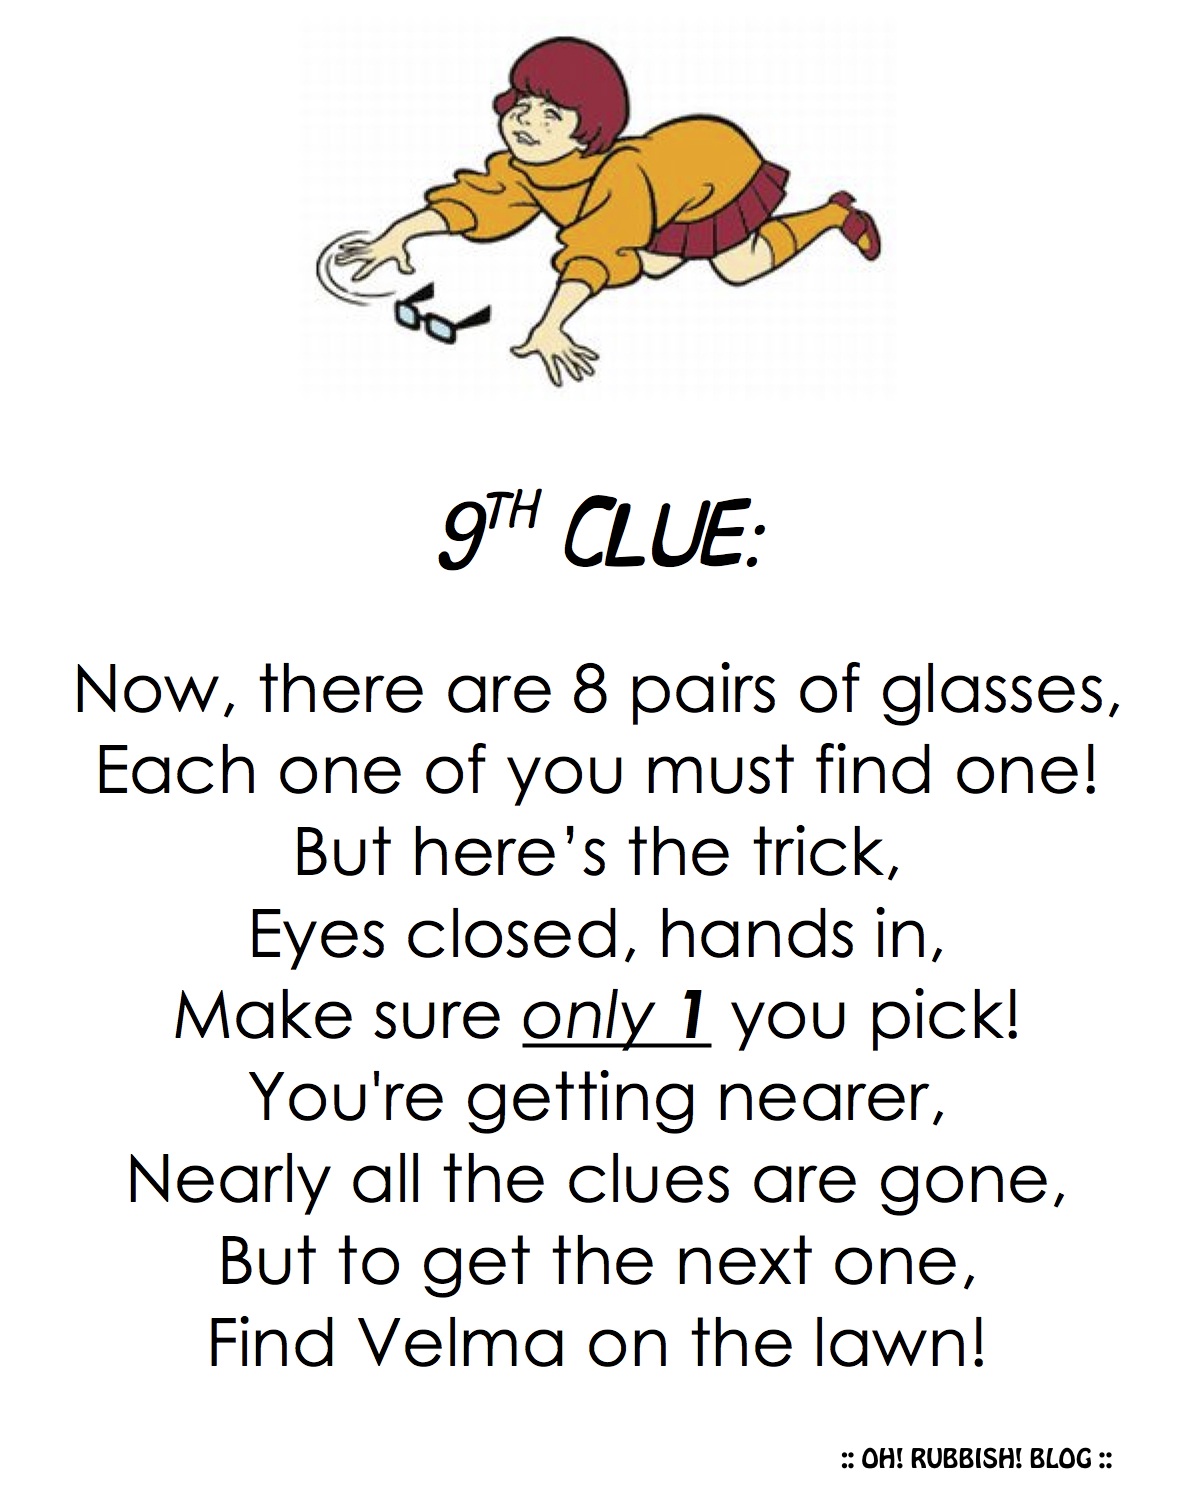 Clue®: Scooby-Doo Mystery Game 